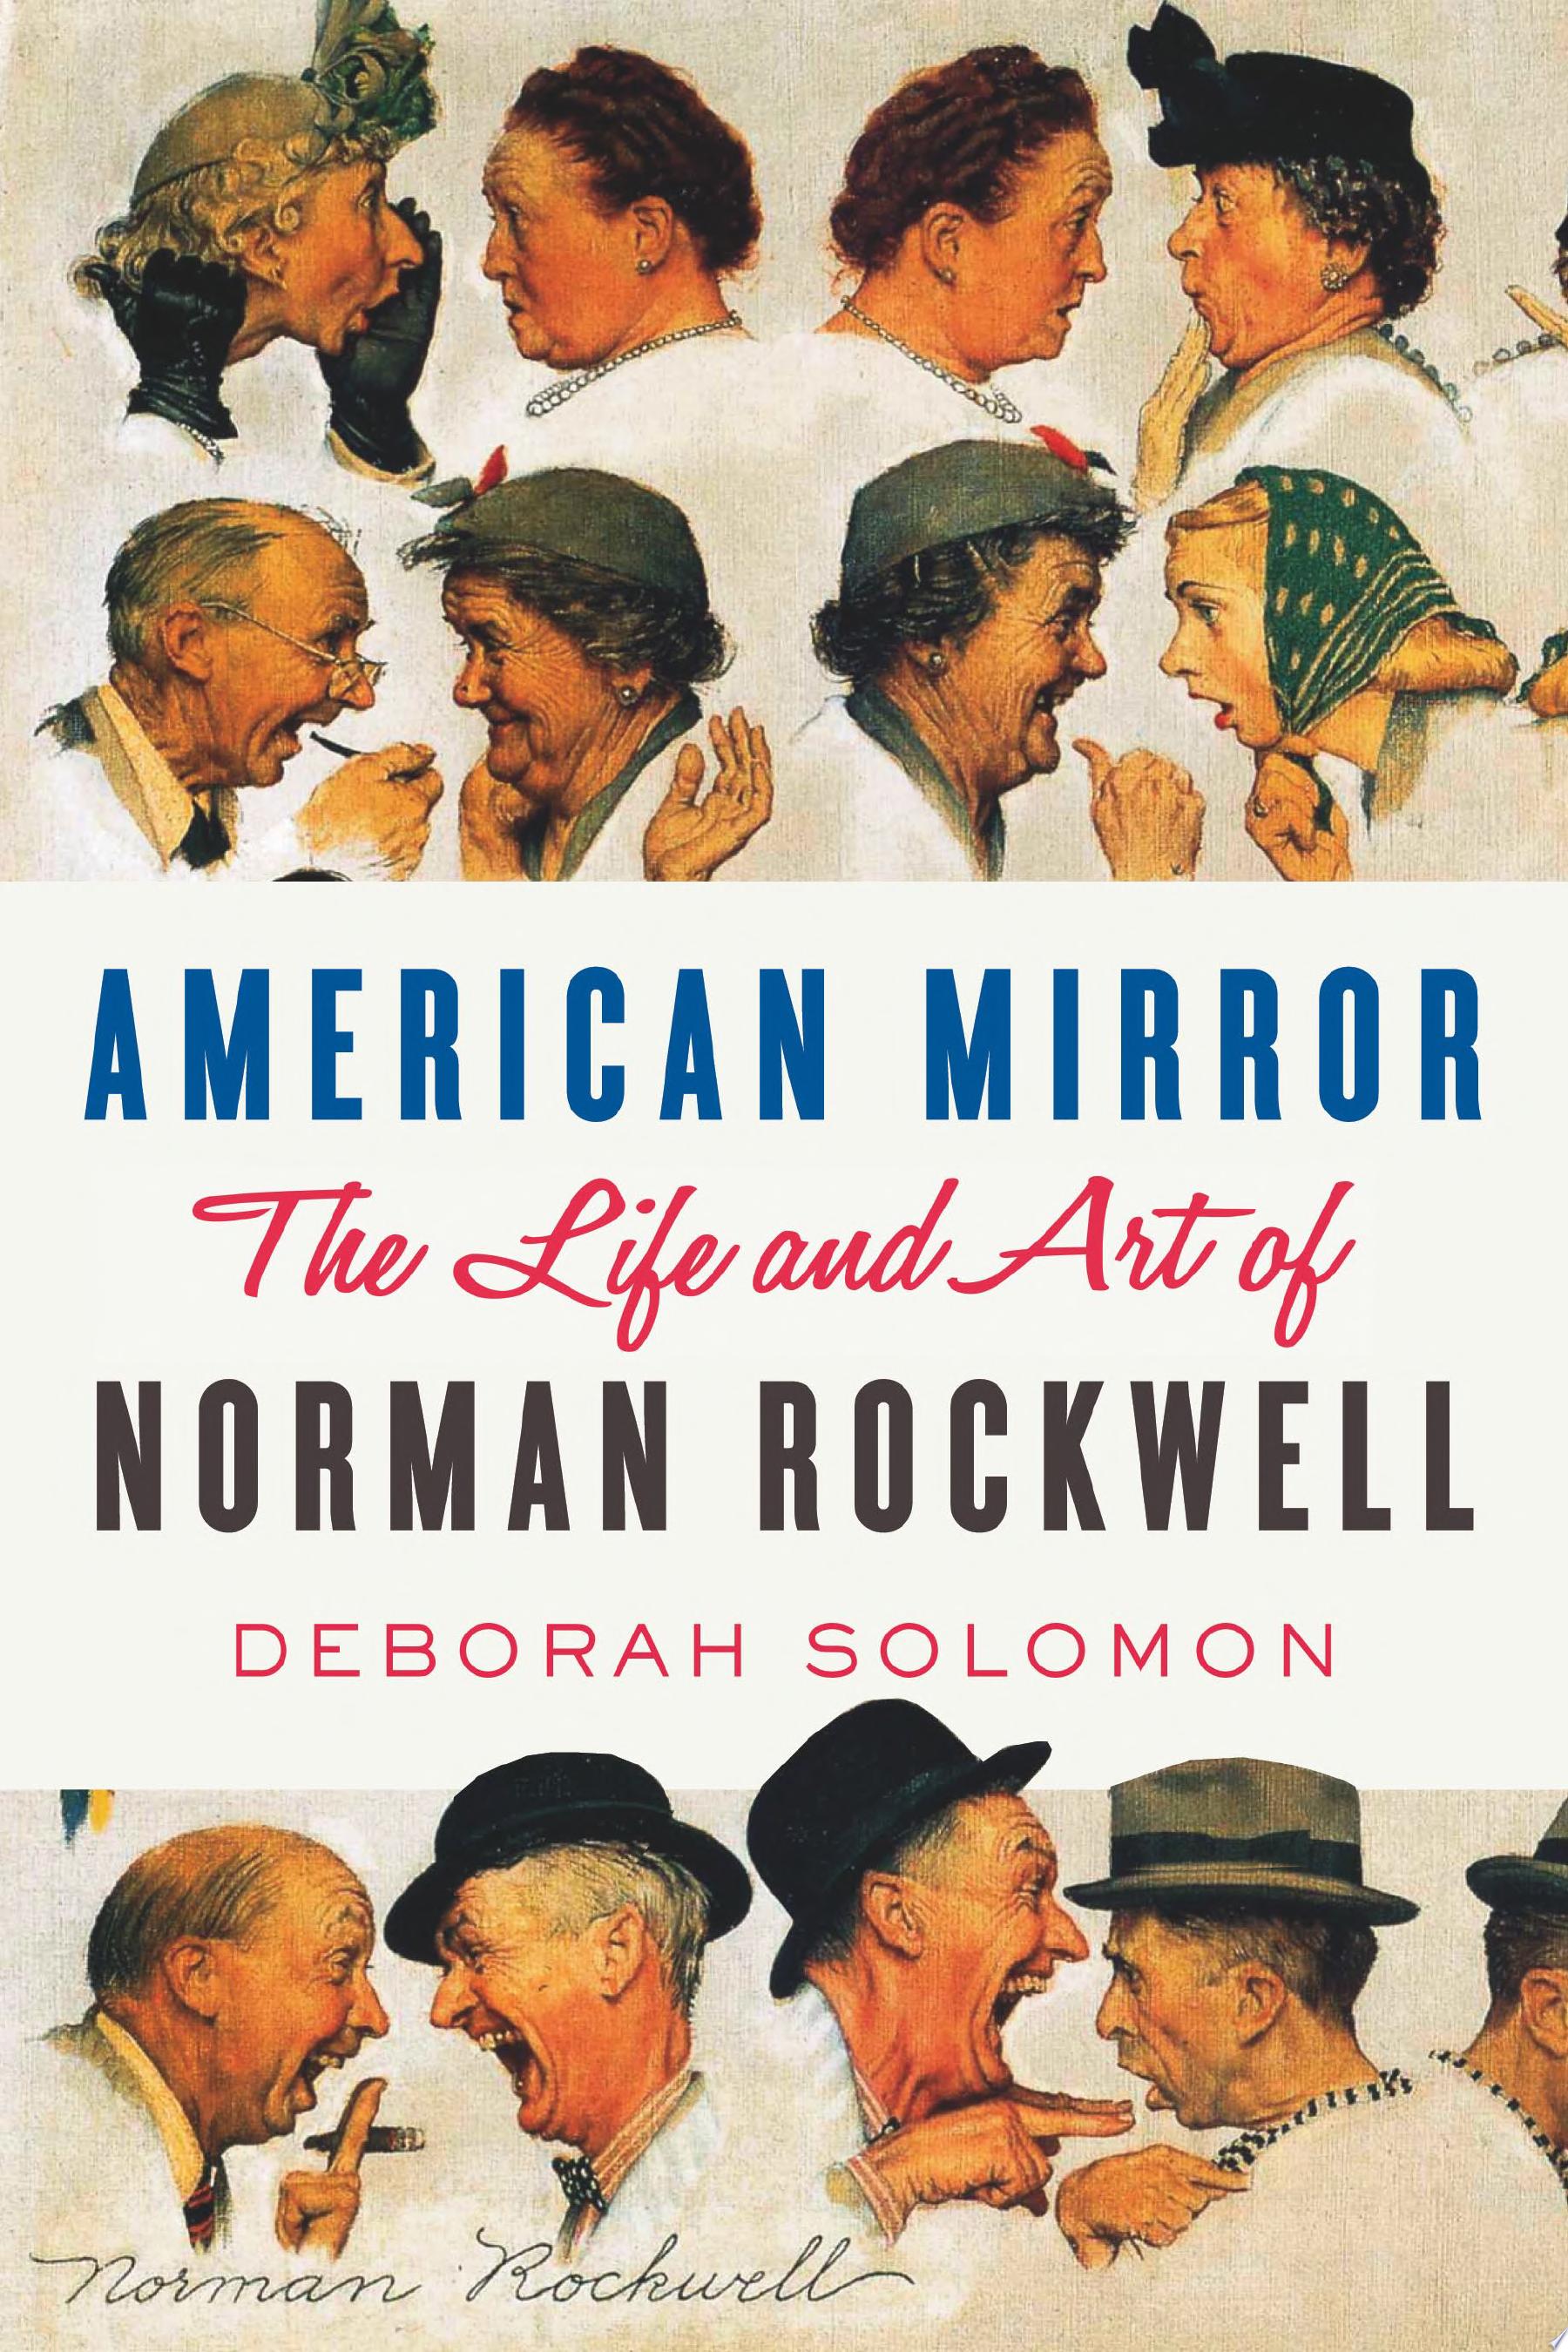 Image for "American Mirror: The Life and Art of Norman Rockwell"